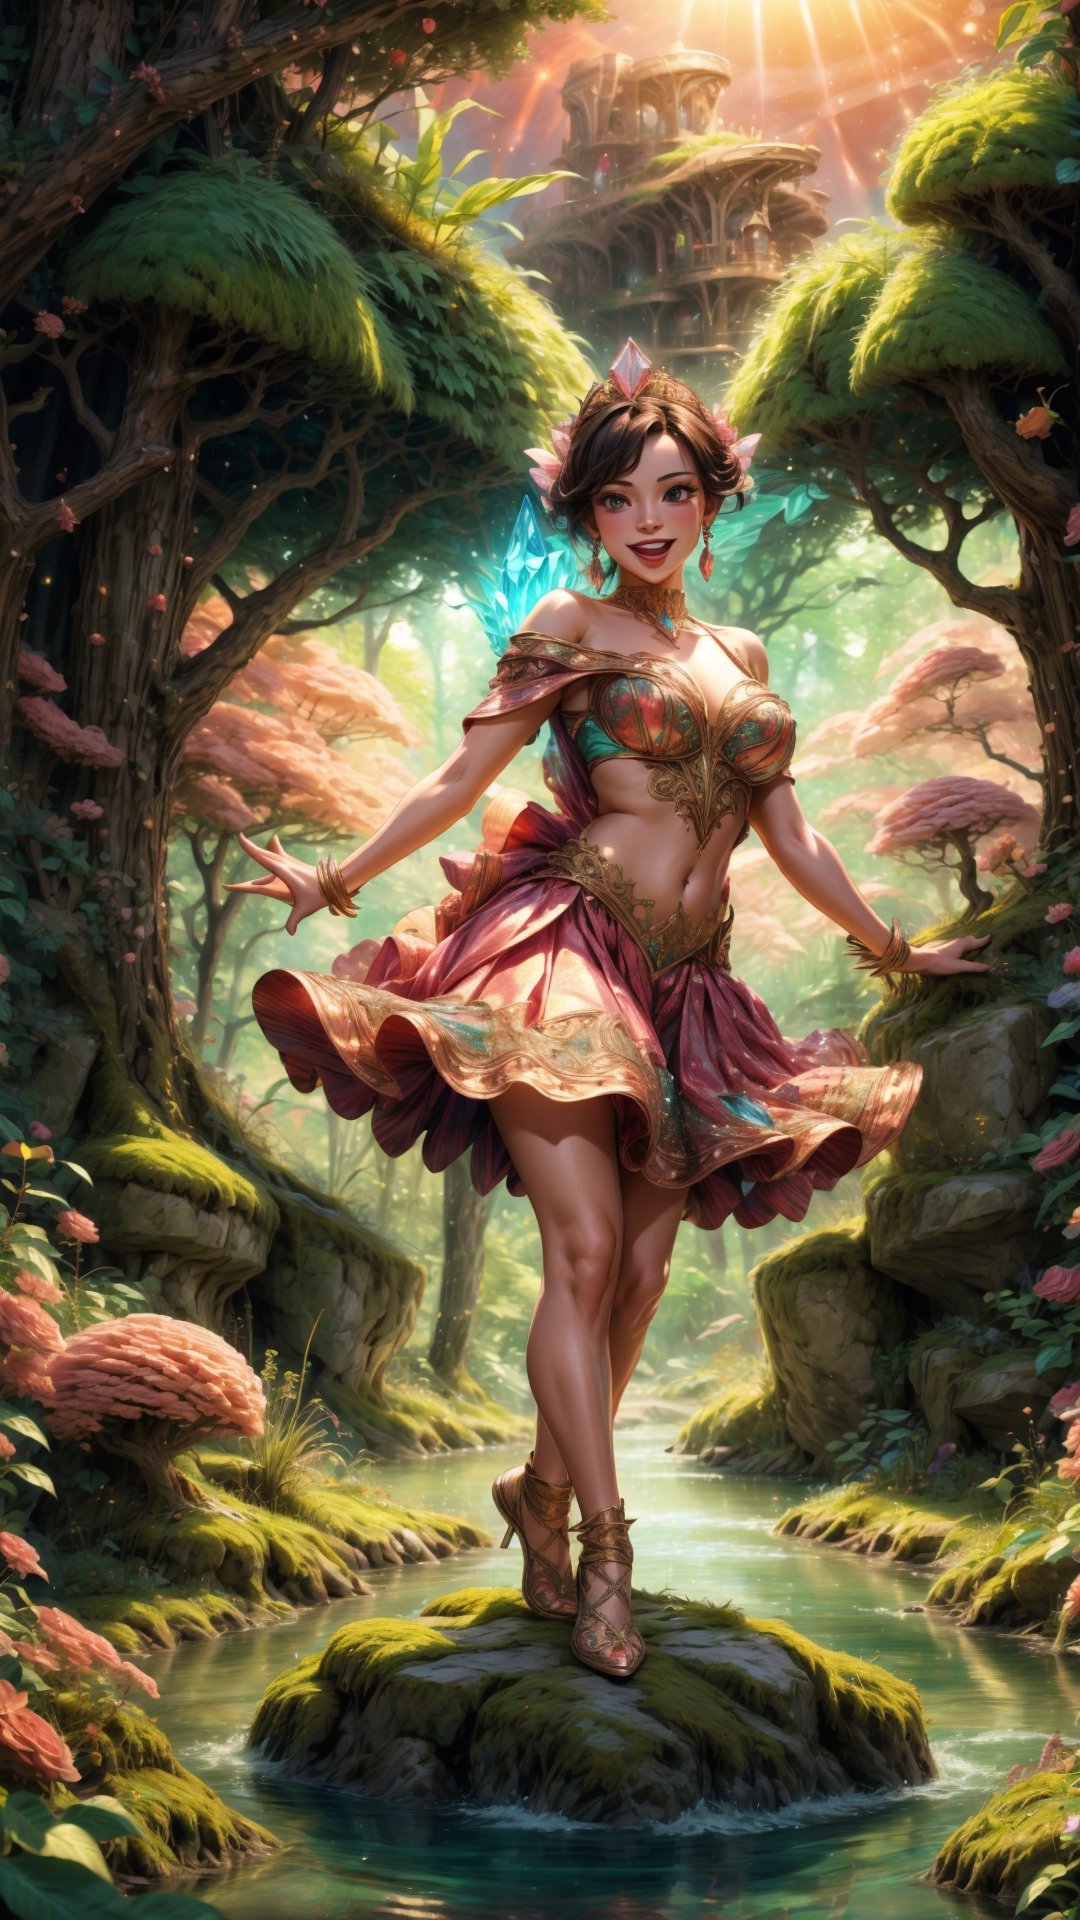 (4k), (masterpiece), (best quality),(extremely intricate), (realistic), (sharp focus), (award winning), (cinematic lighting), (extremely detailed),

A girl dancing with fairies in a magical forest, her laughter echoing through the trees.

,EpicSky,Isometric_Setting,DonMBl00mingF41ryXL ,TreeAIv2,phcrystal,Circle